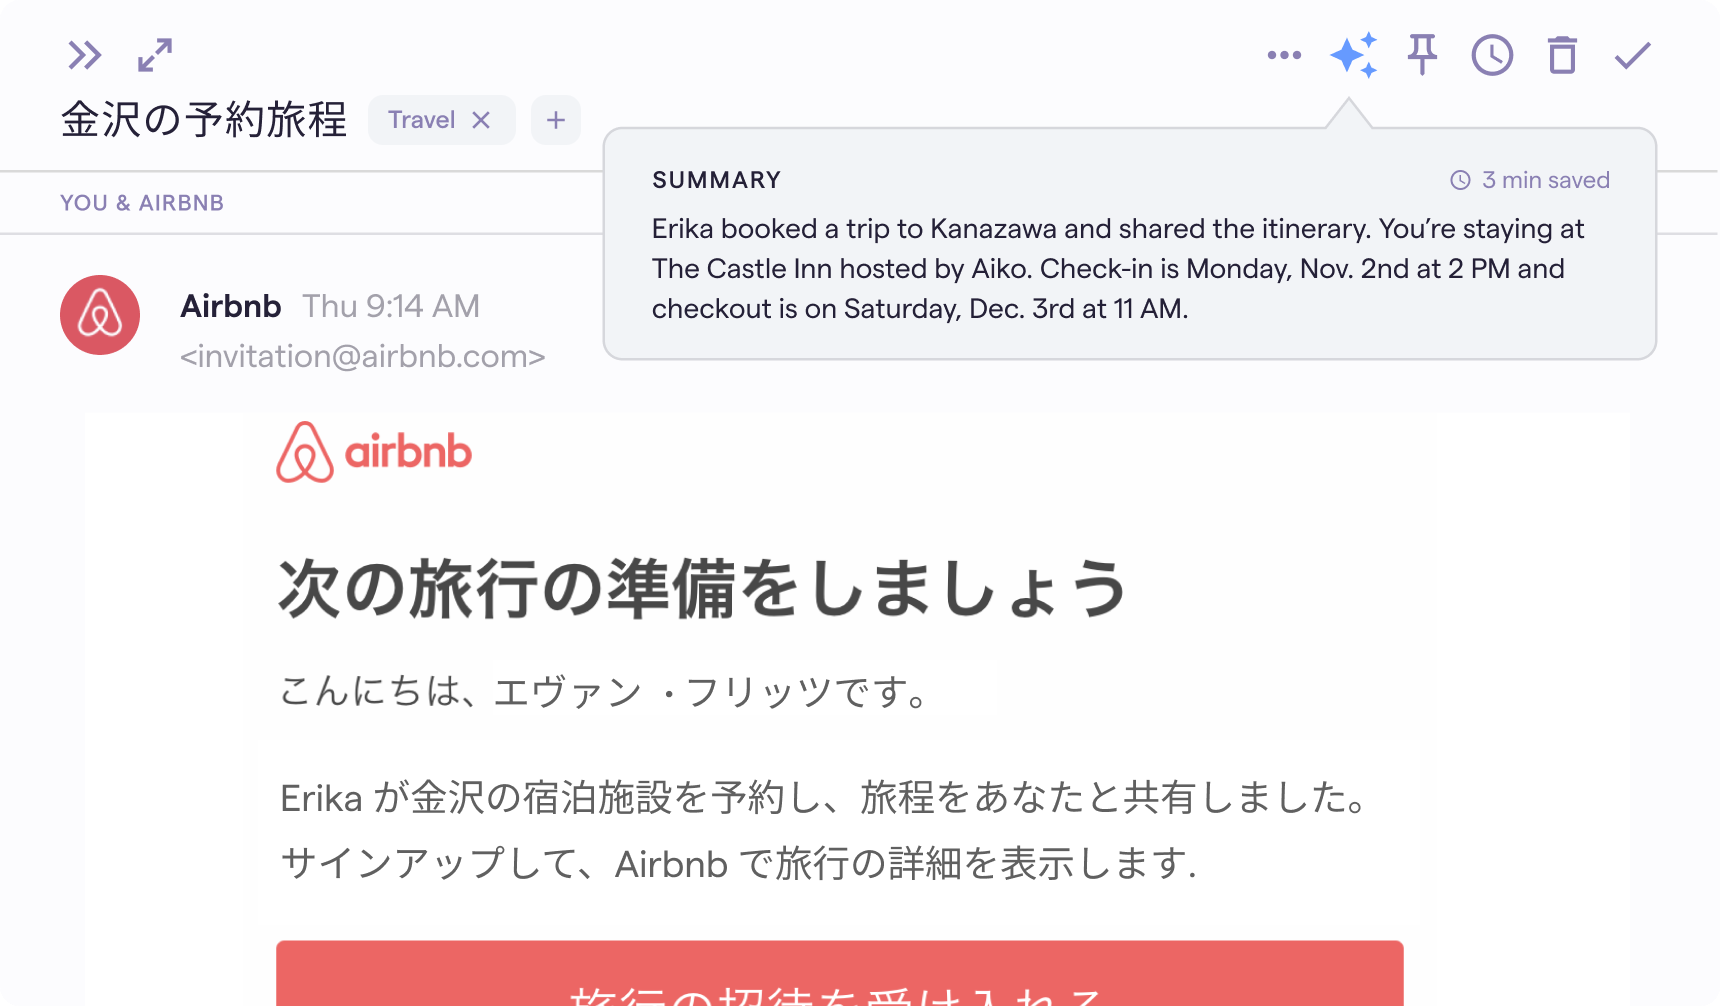 AI-generated summary in English of an Airbnb confirmation written in Japanase